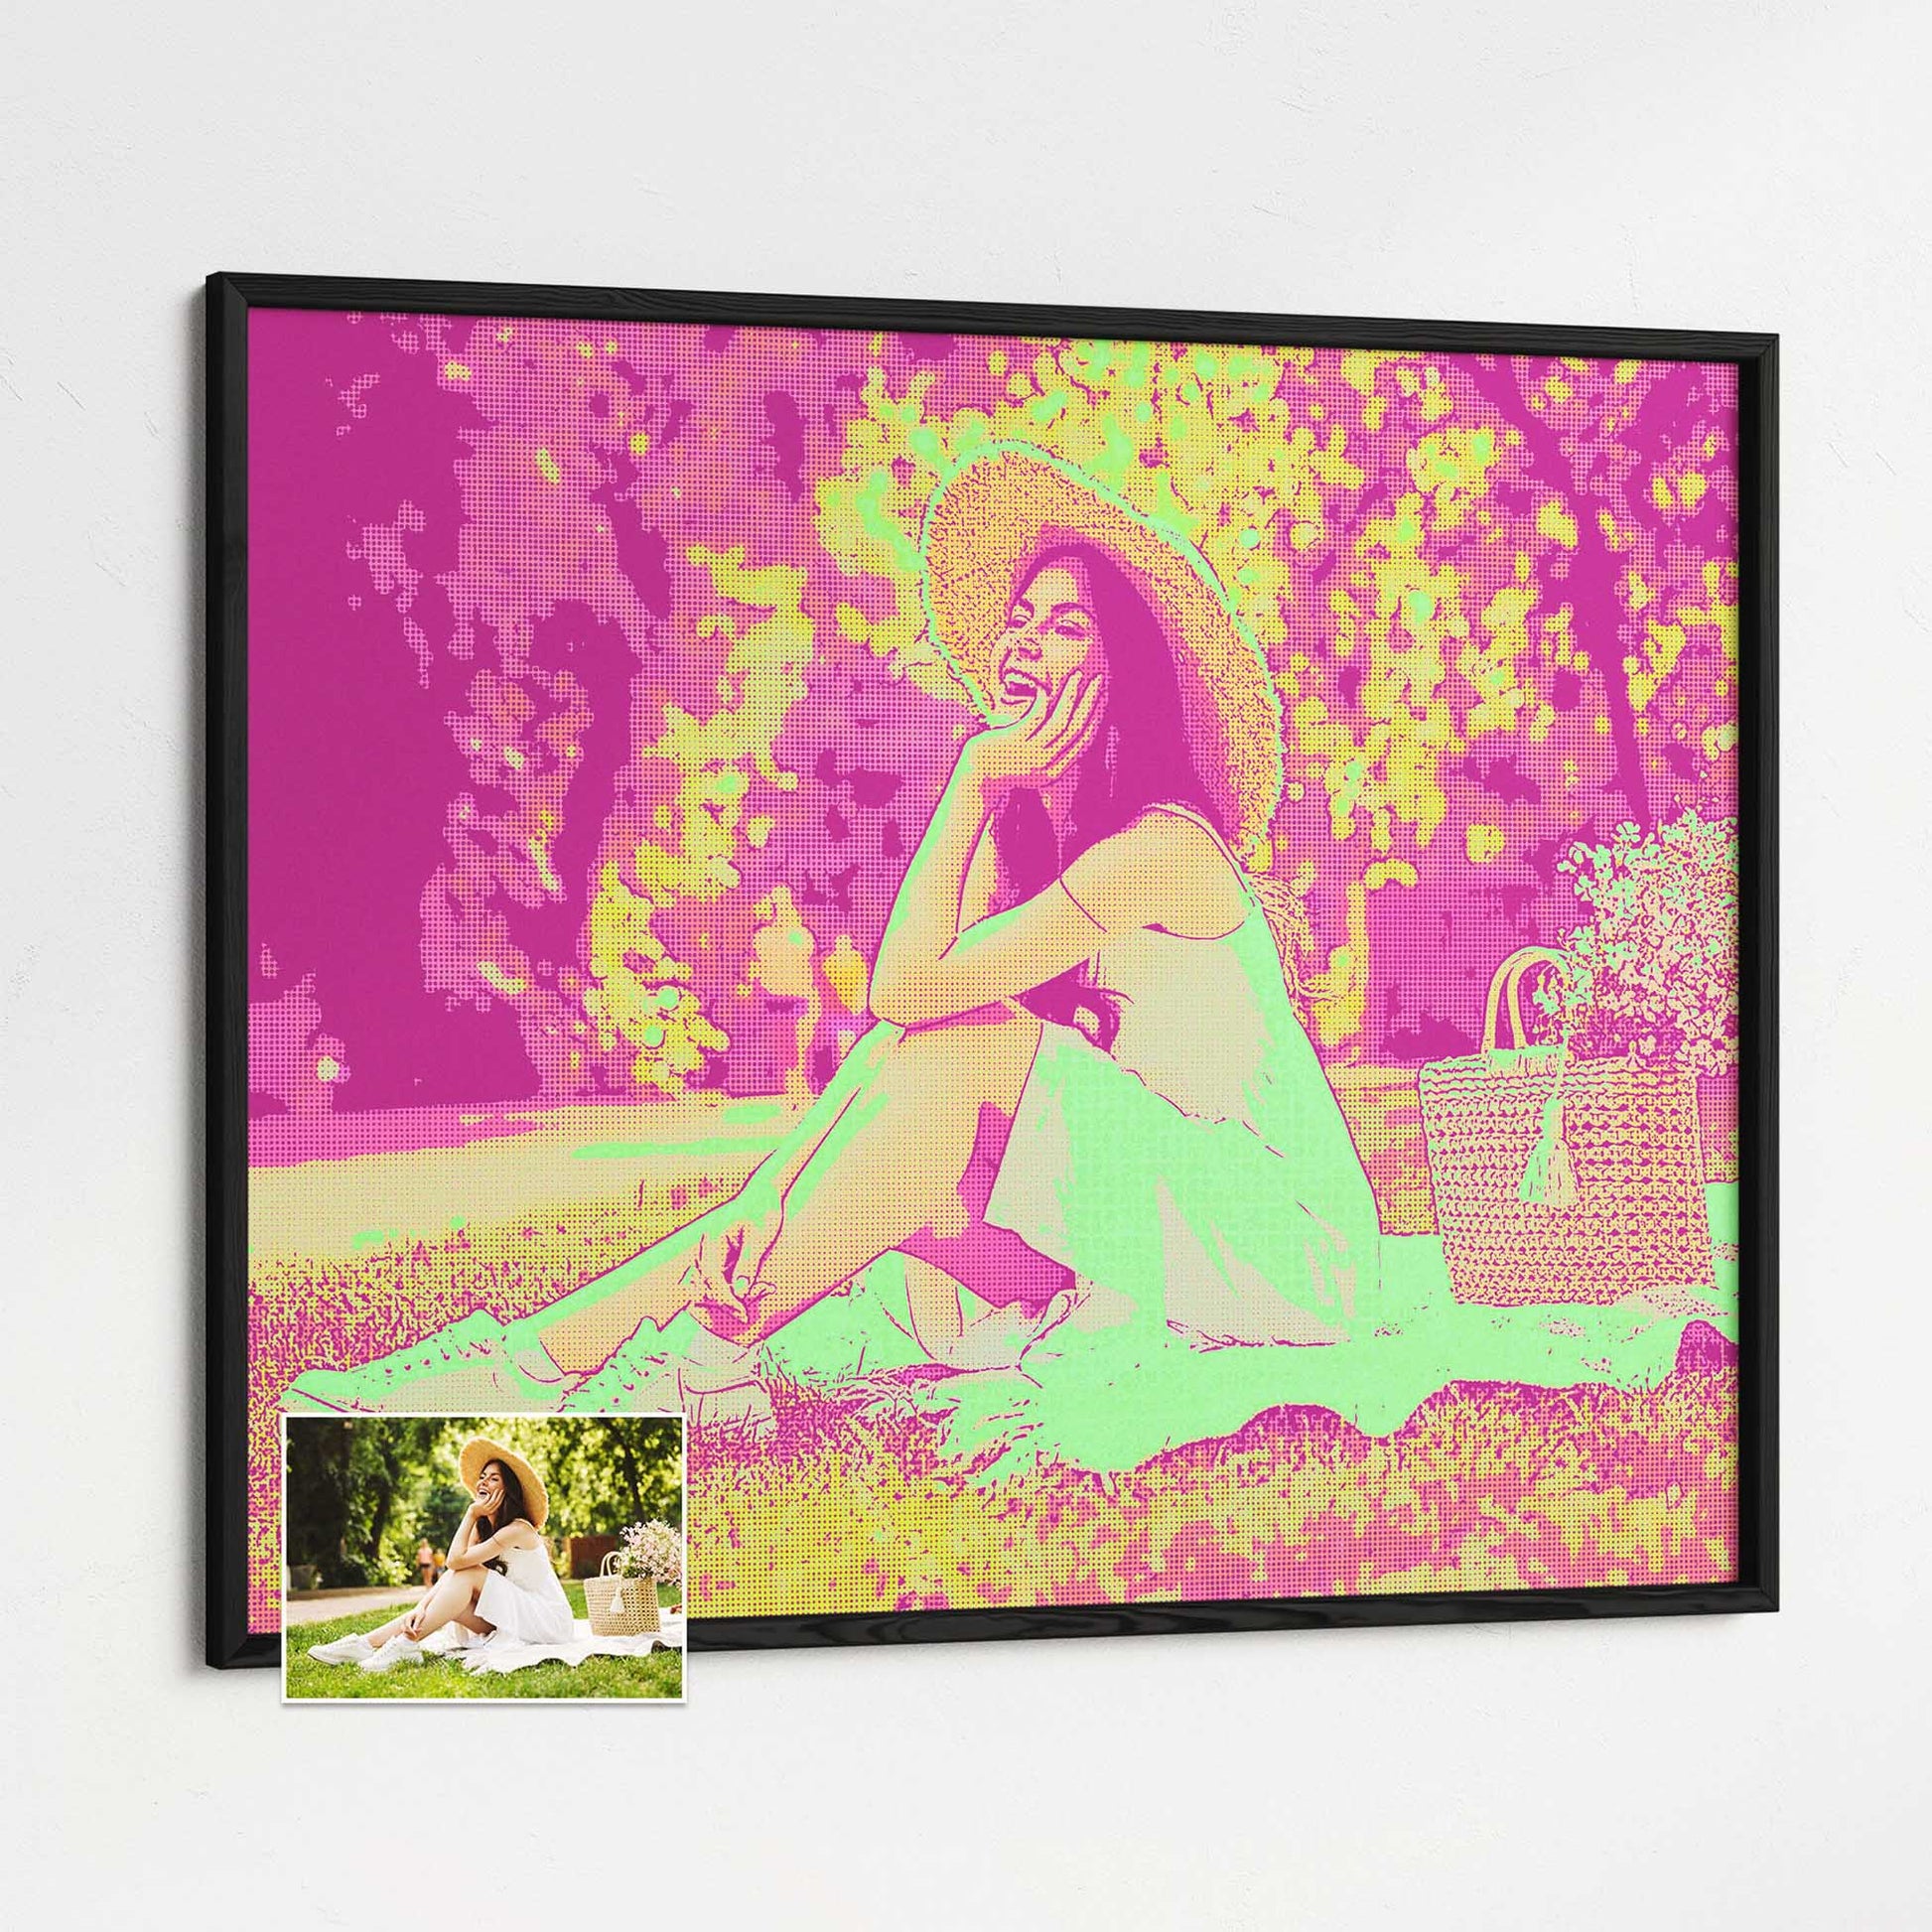 Make a statement with a Personalised Green & Pink Pop Art Framed Print from your photo. This eye-catching artwork exudes a unique and original charm, blending vibrant colors and creative design. Crafted on thick museum-quality paper 